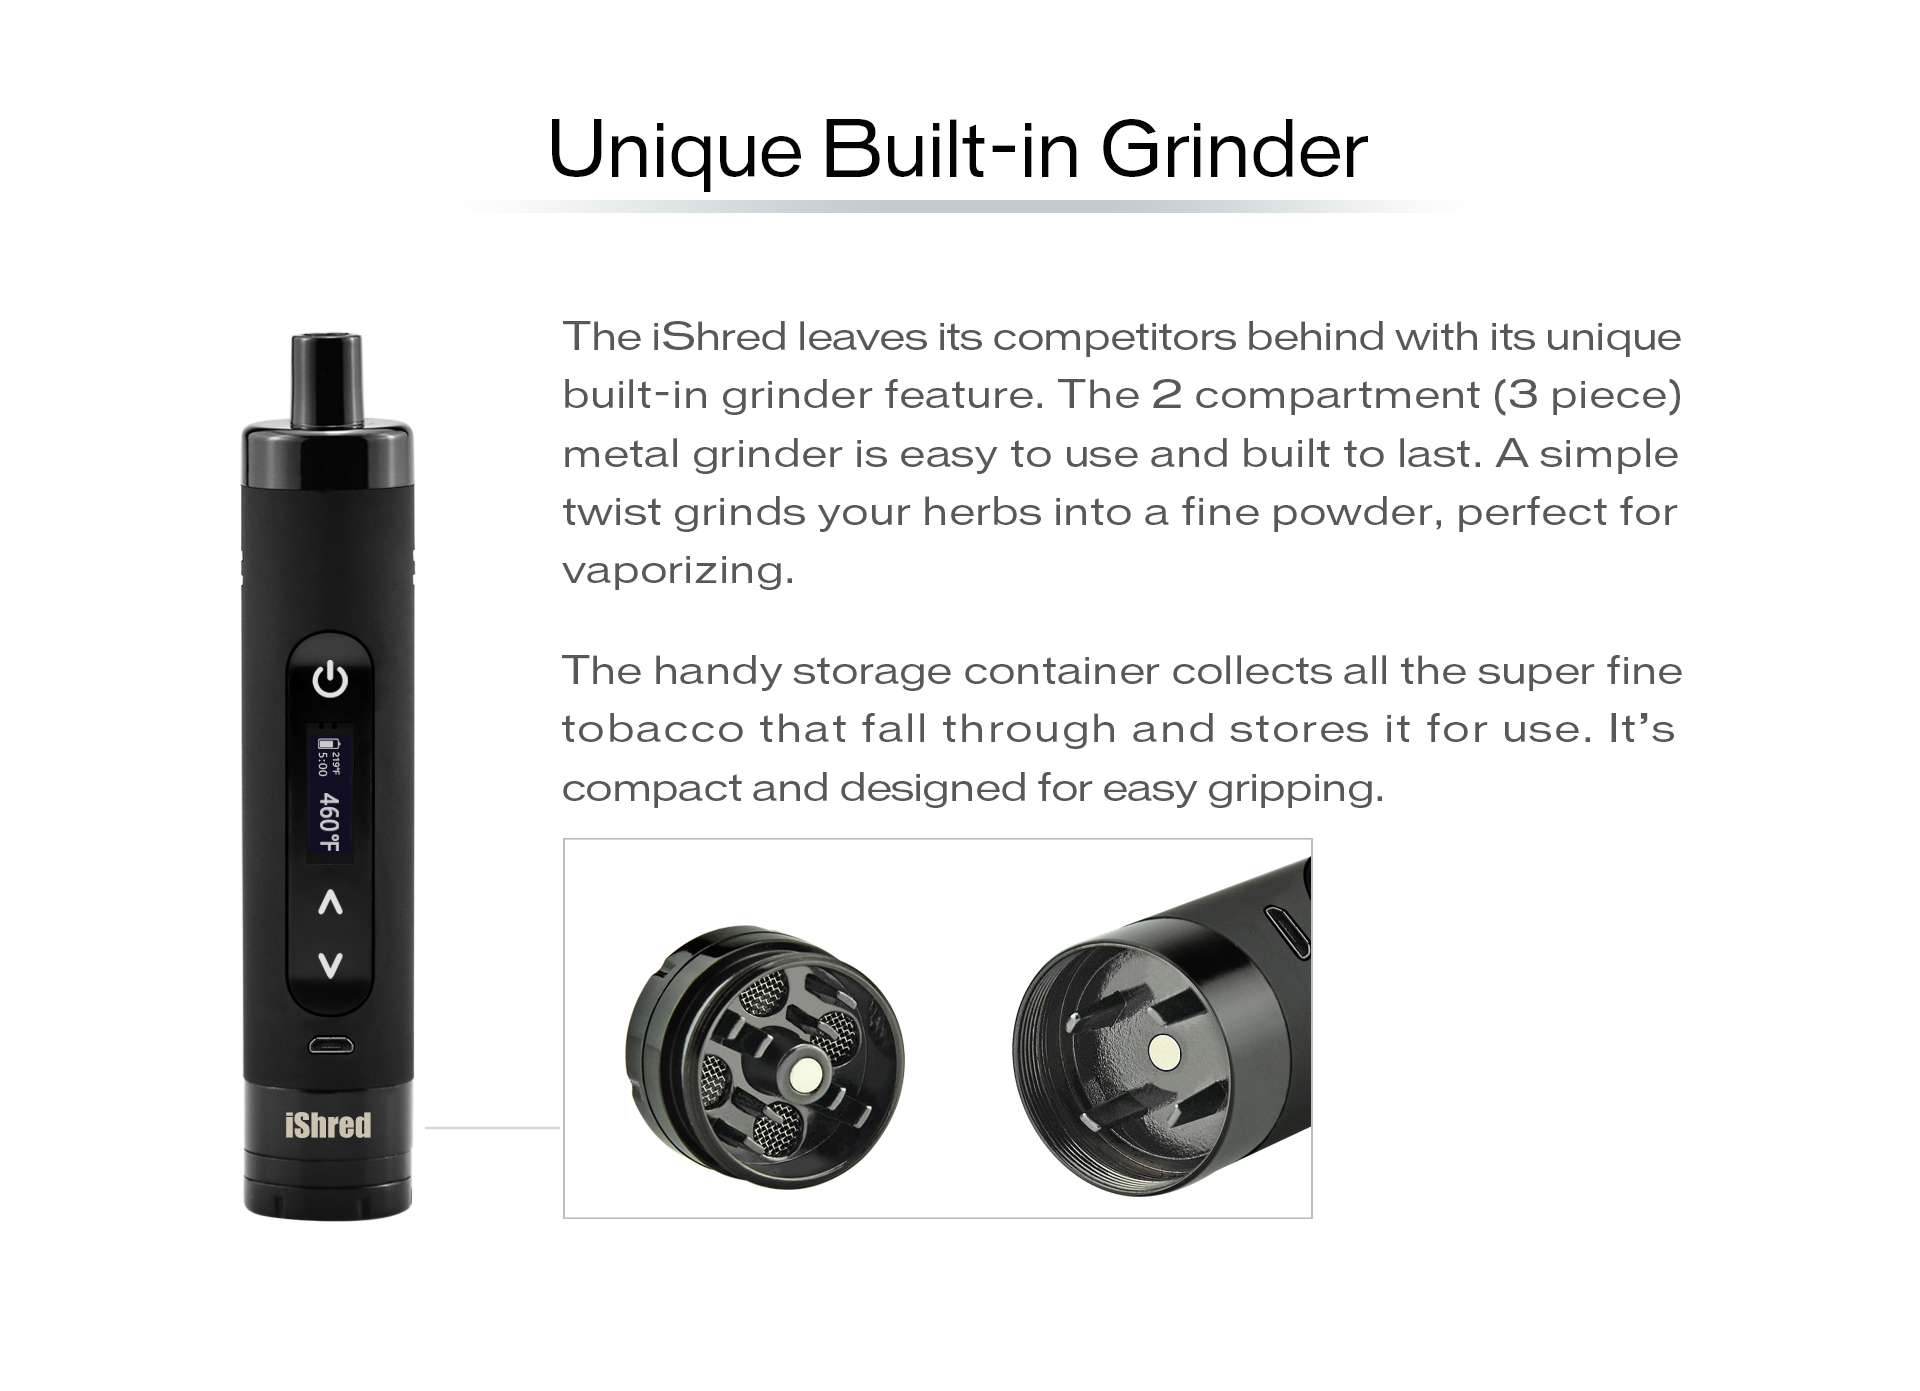 Yocan iShred leaves its competitors behind with its unique built-in grinder feature.